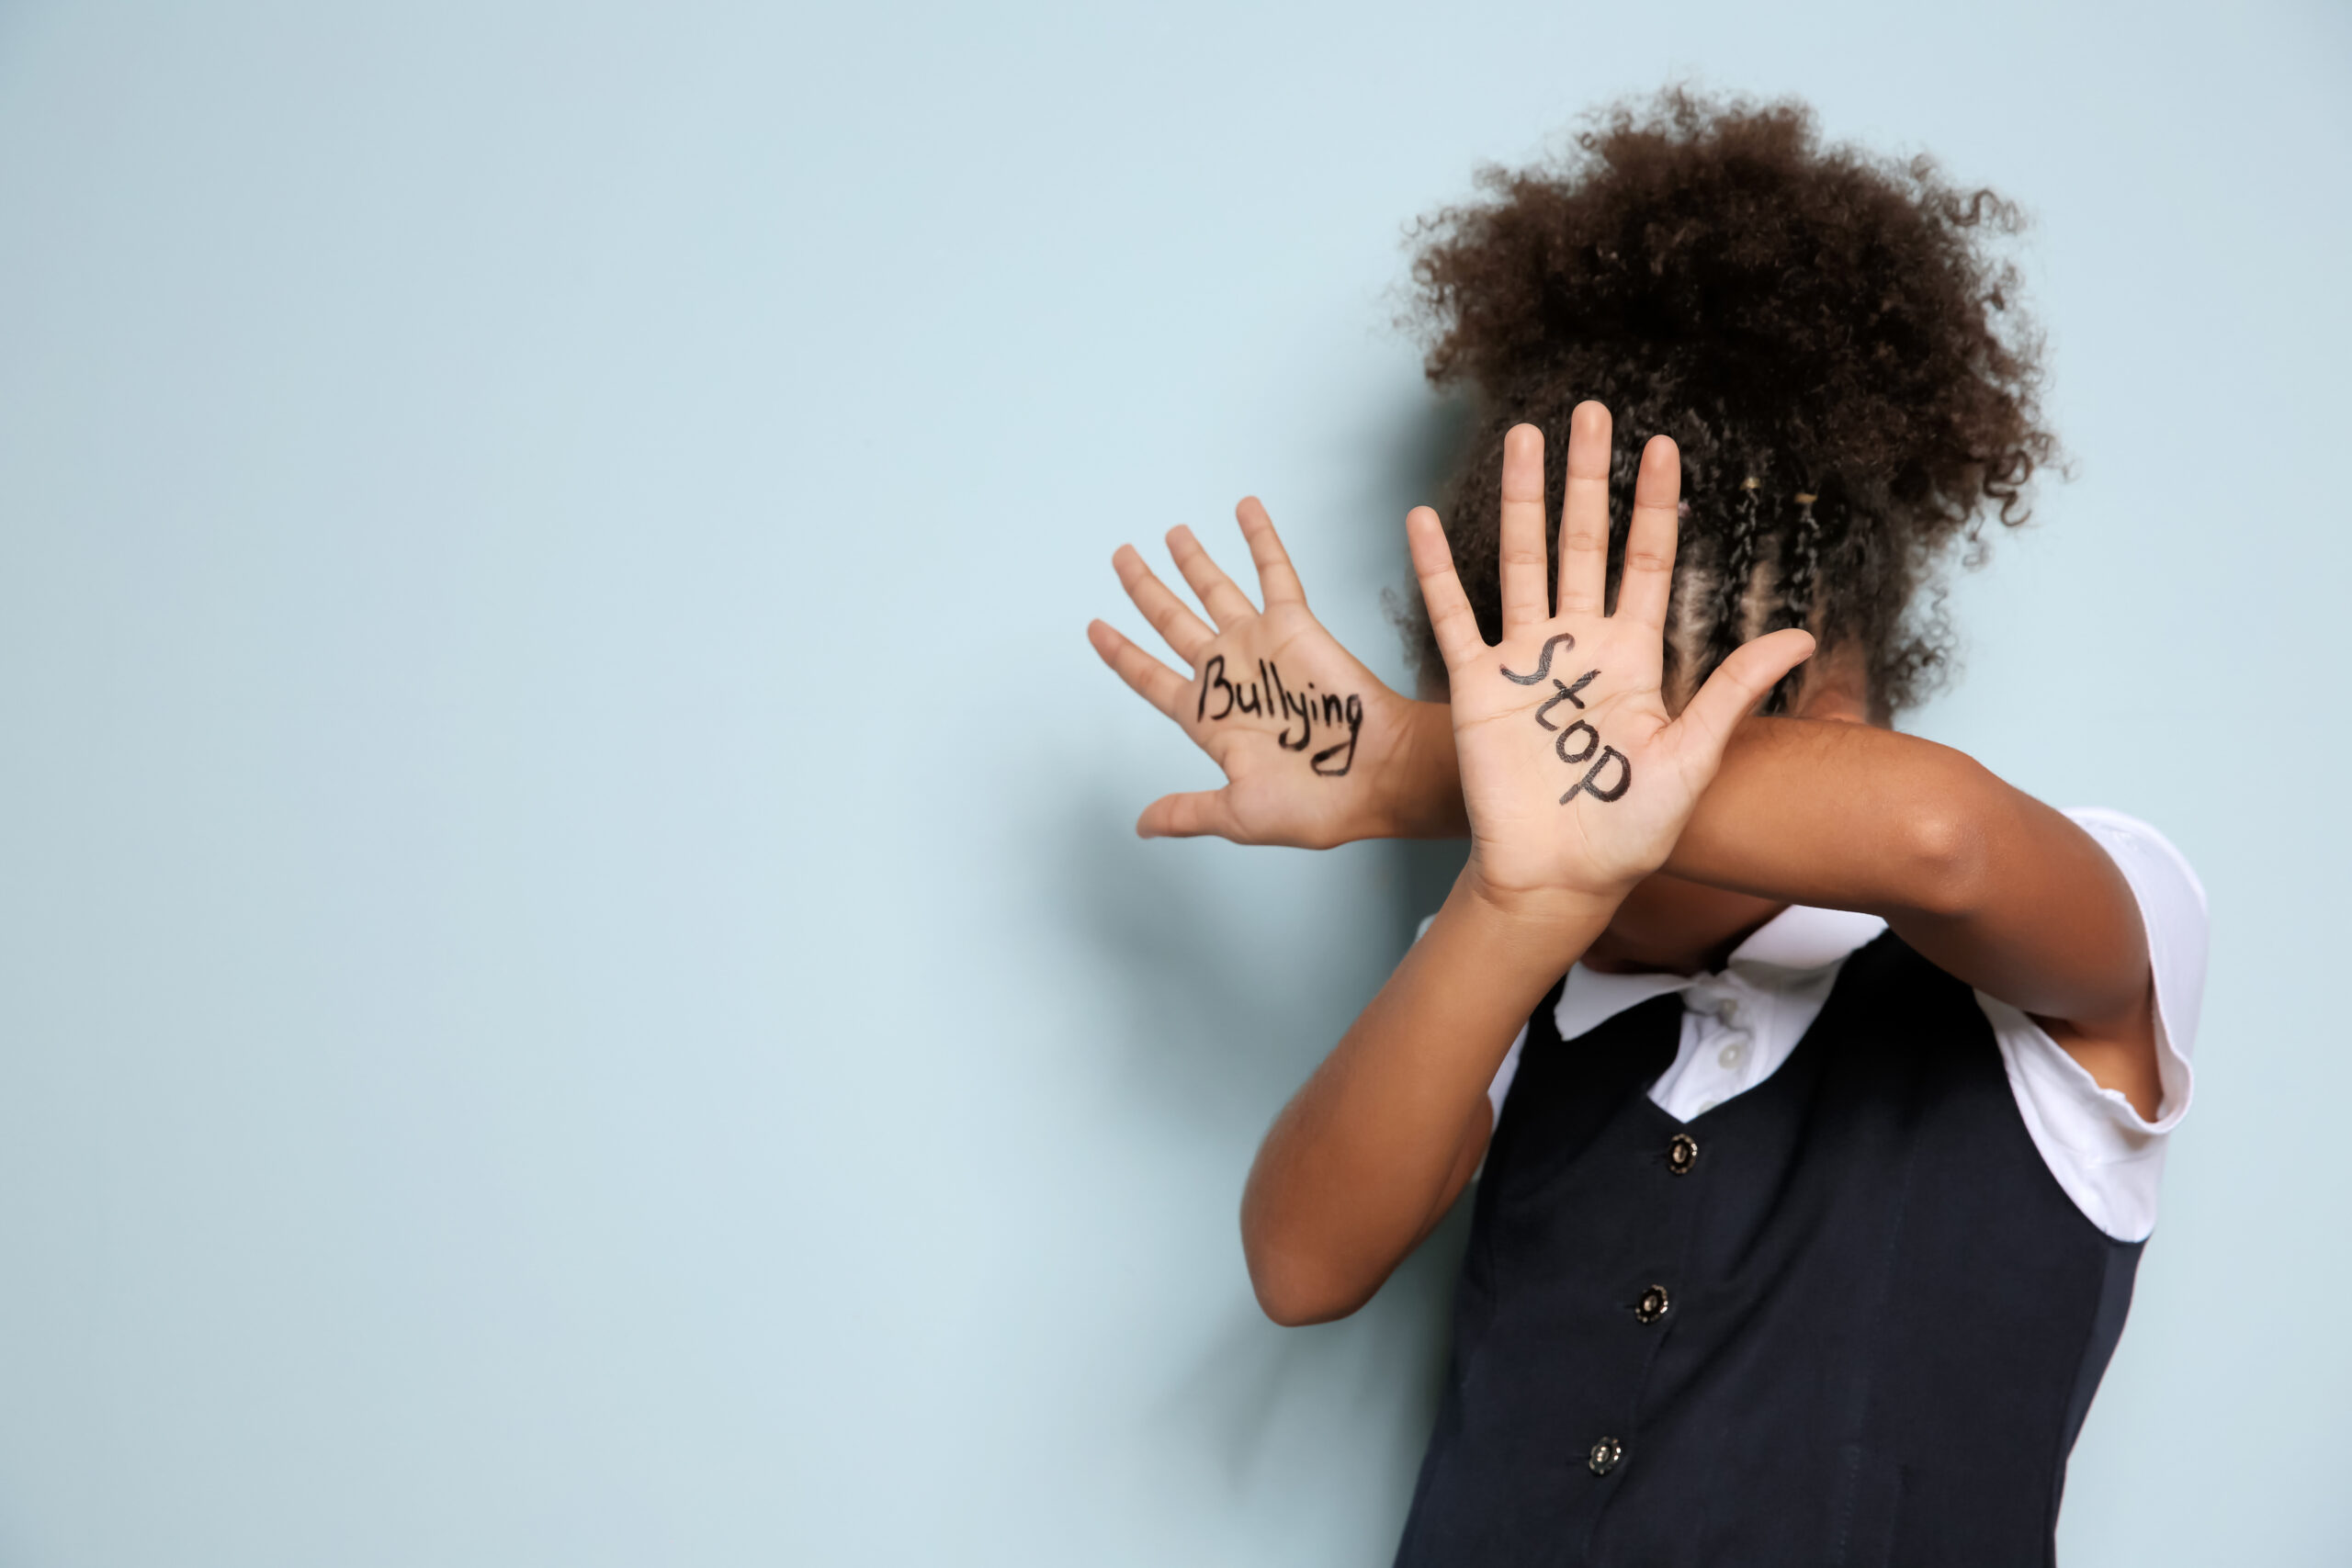 Little girl holding palms up to defend herself, the words 'stop' and 'bullying' written on her palms.